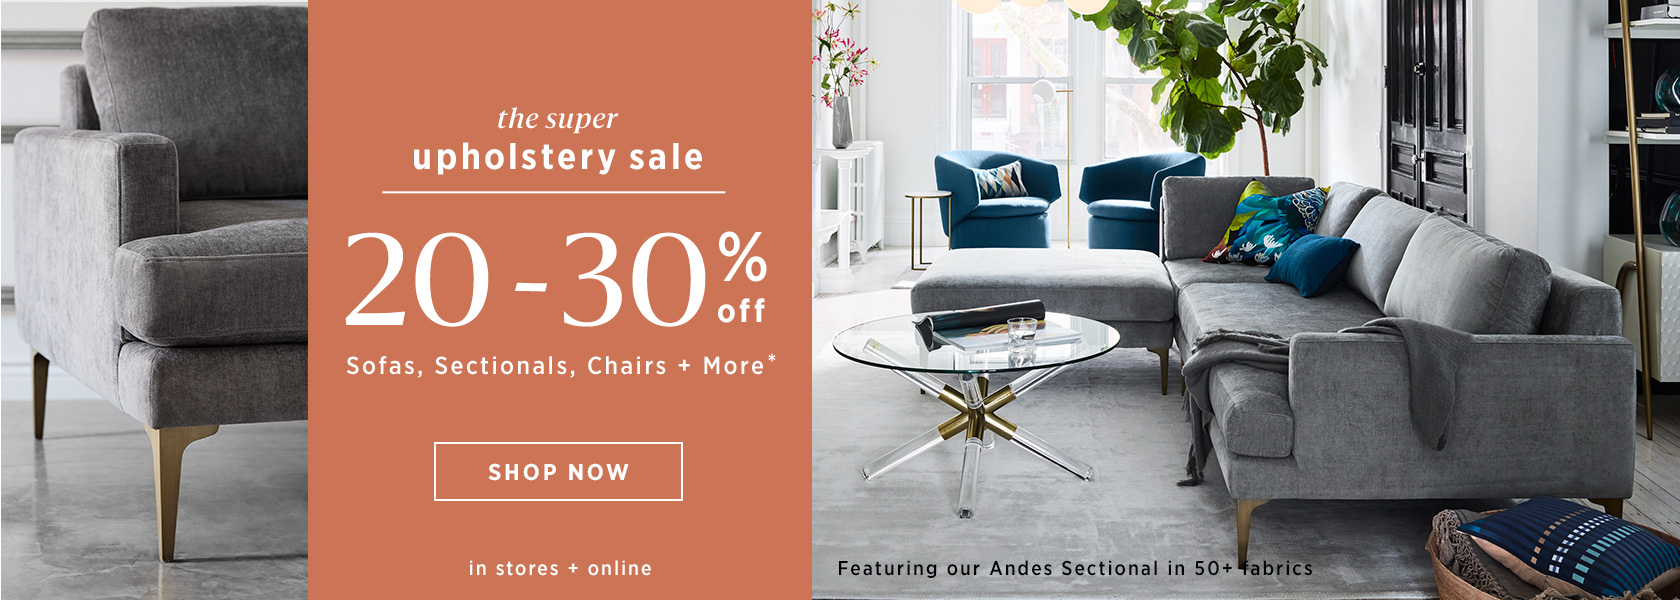 20-30% Off Sofas, Sectionals, Chairs + More